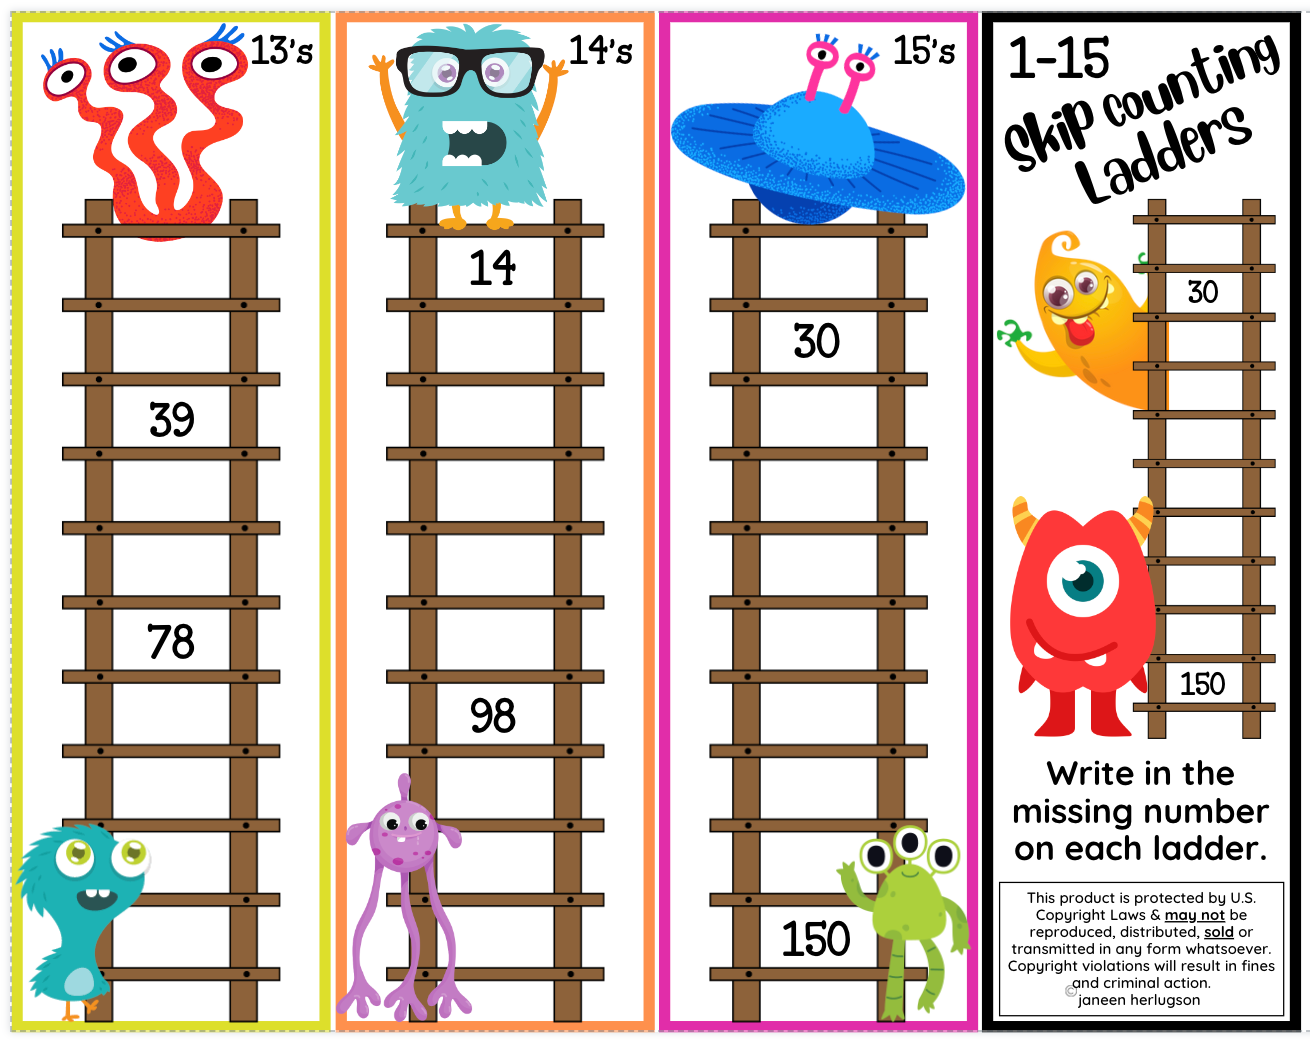 Multiplication Facts 1-15 Skip Counting Games - PHYSICAL & DIGITAL VERSION